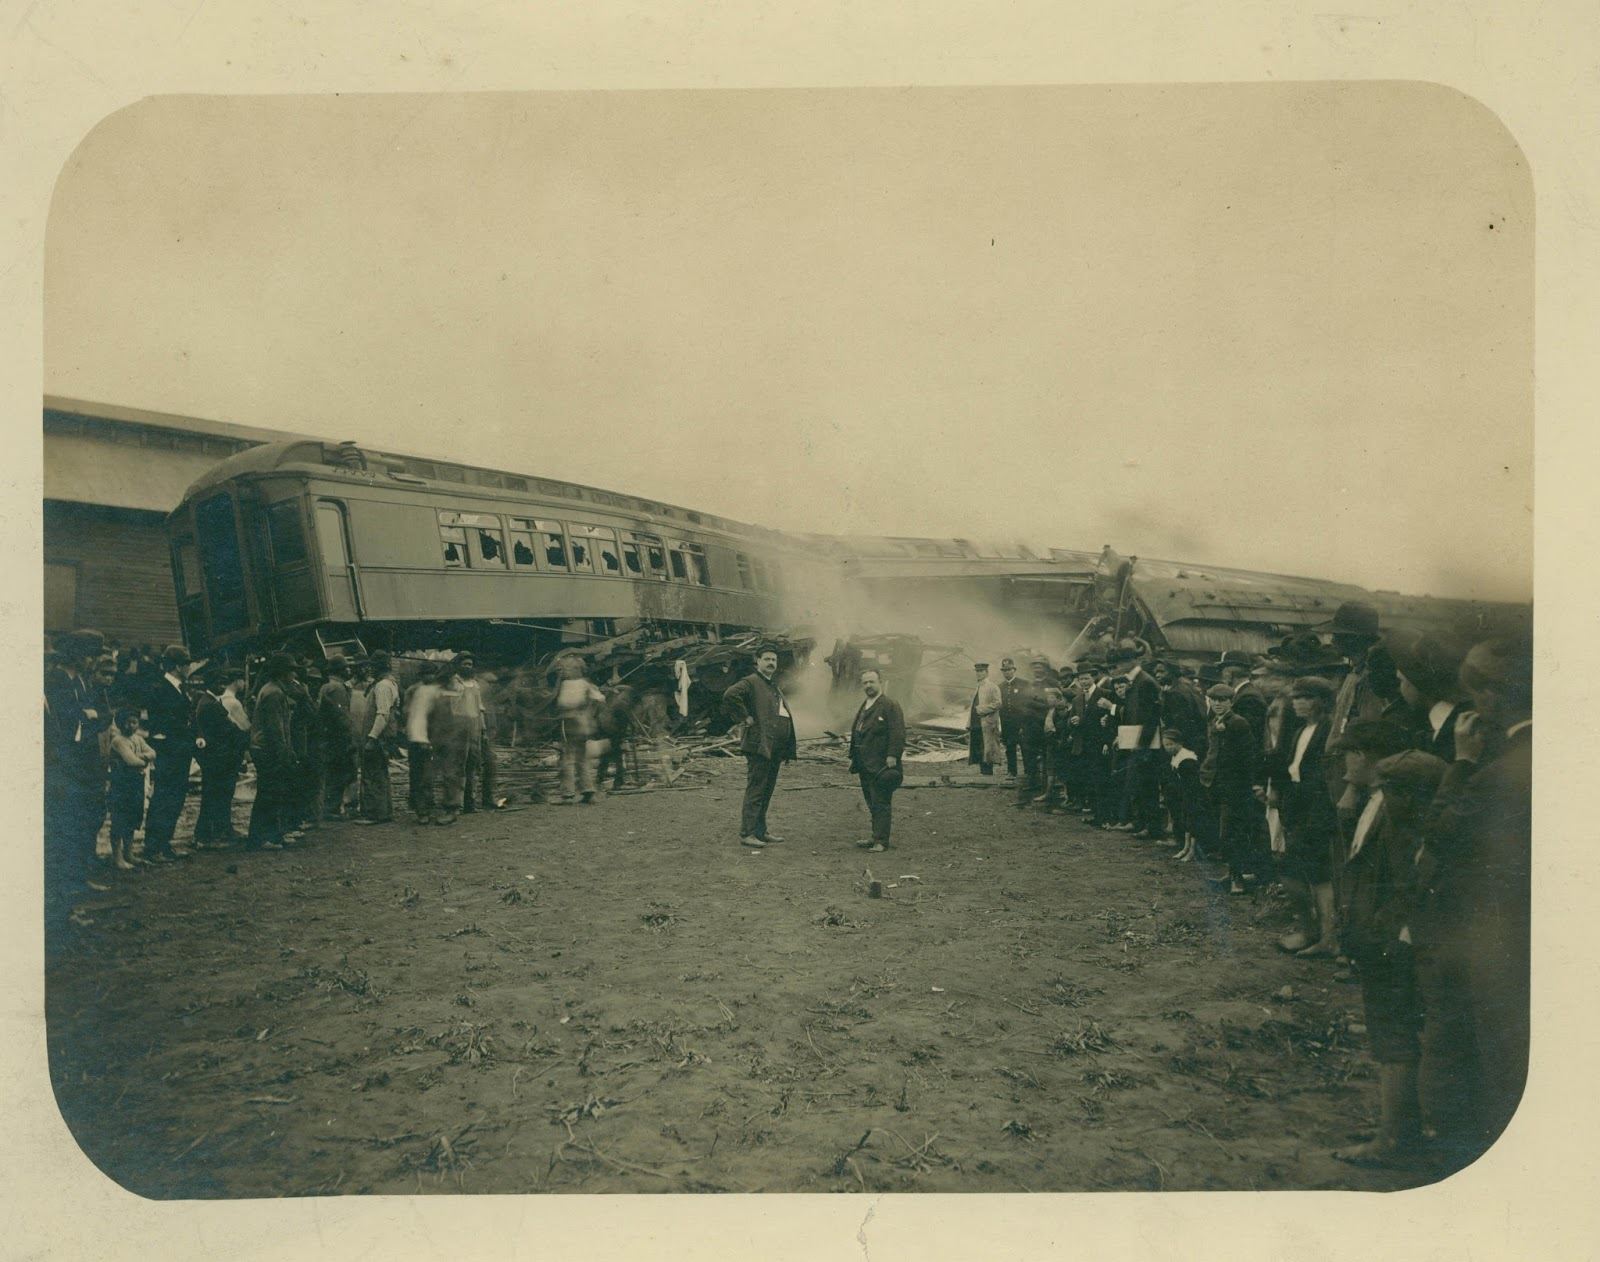 Wreck of Southern Railway's No. 35 Mail Train